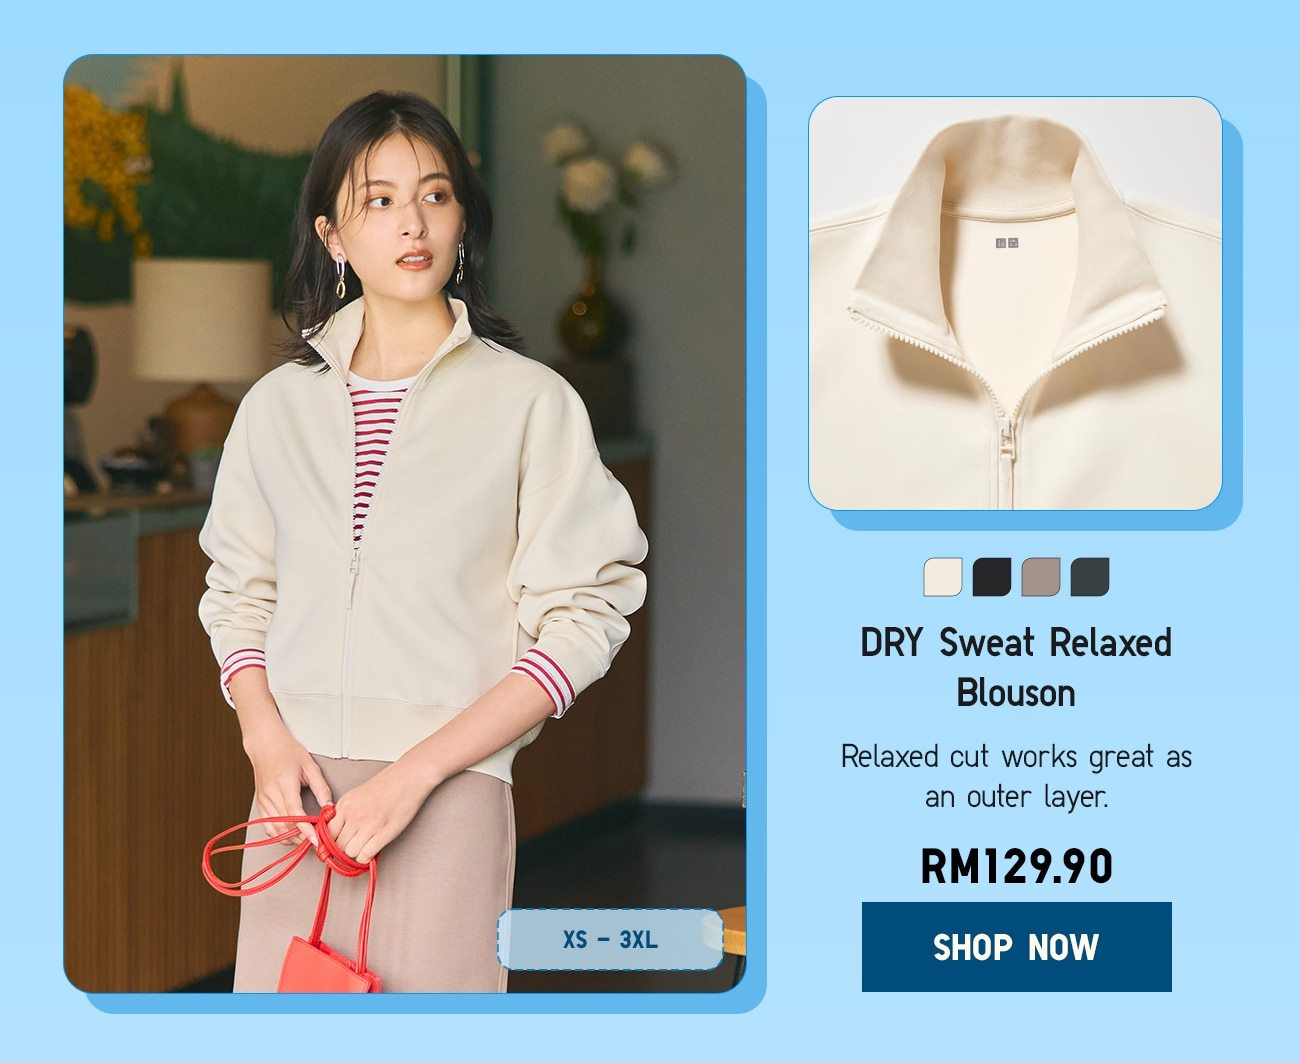 DRY Sweat Relaxed Blouson